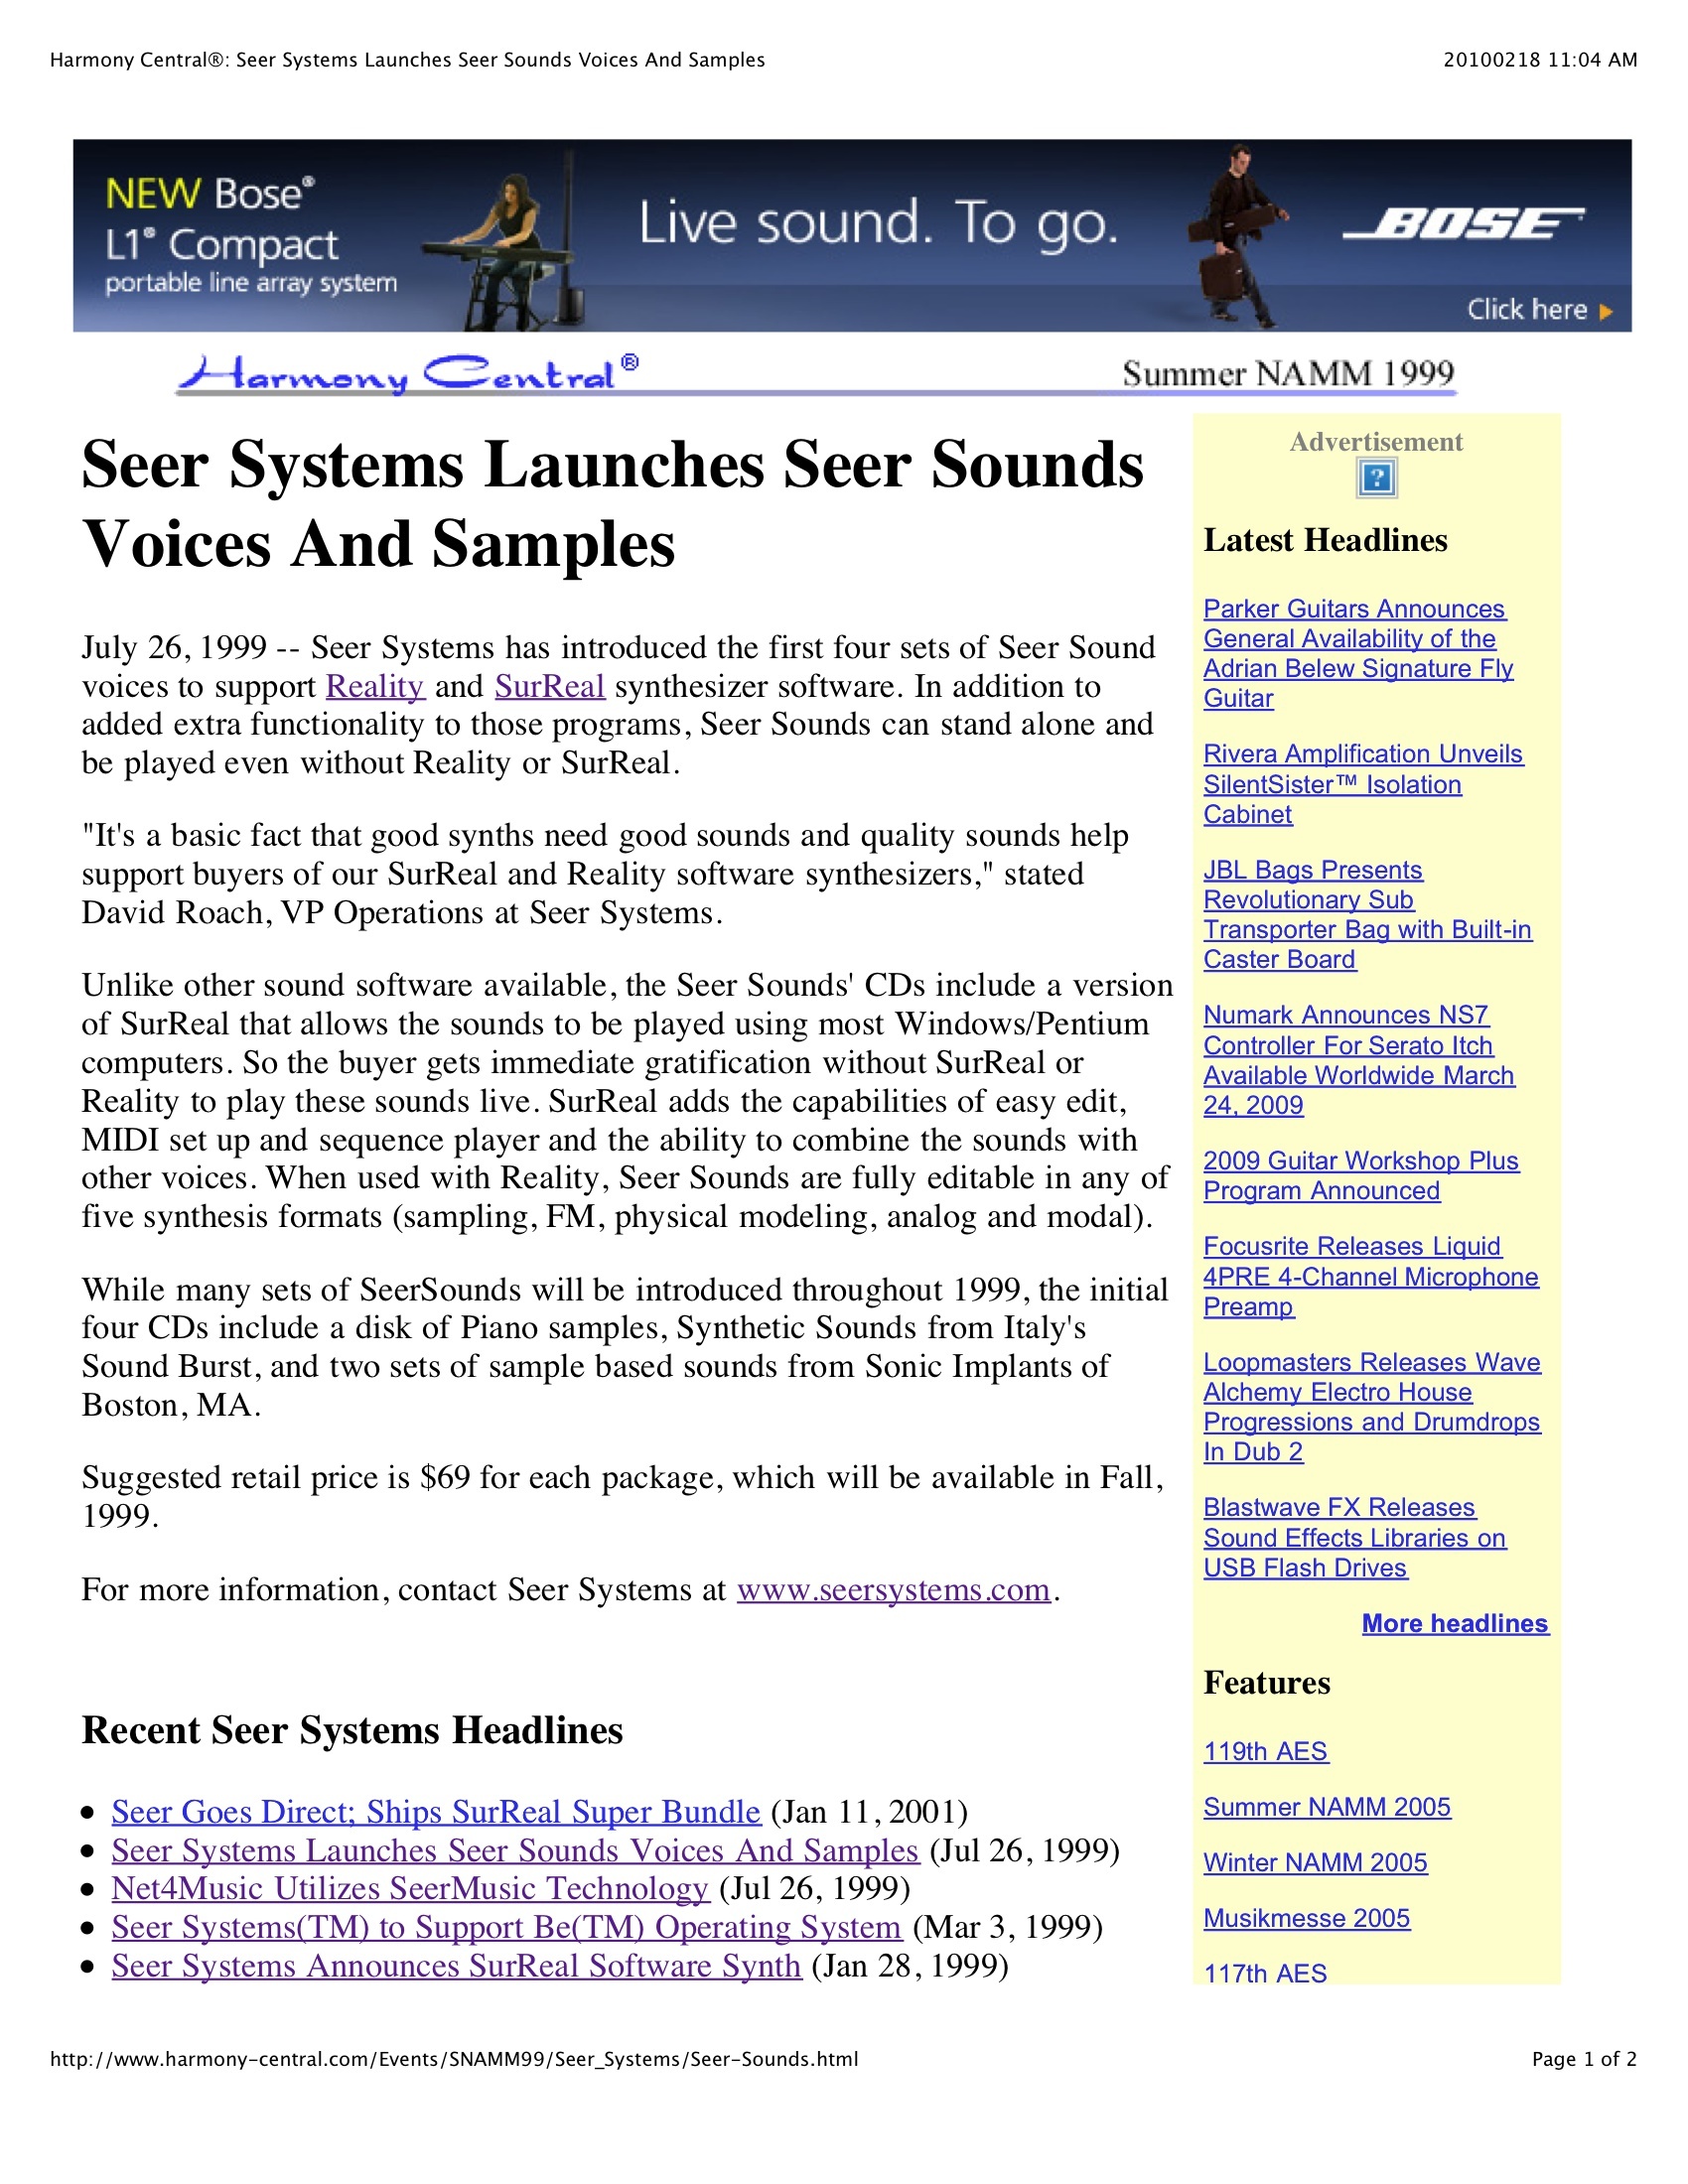 19990726 Sounds Page-01